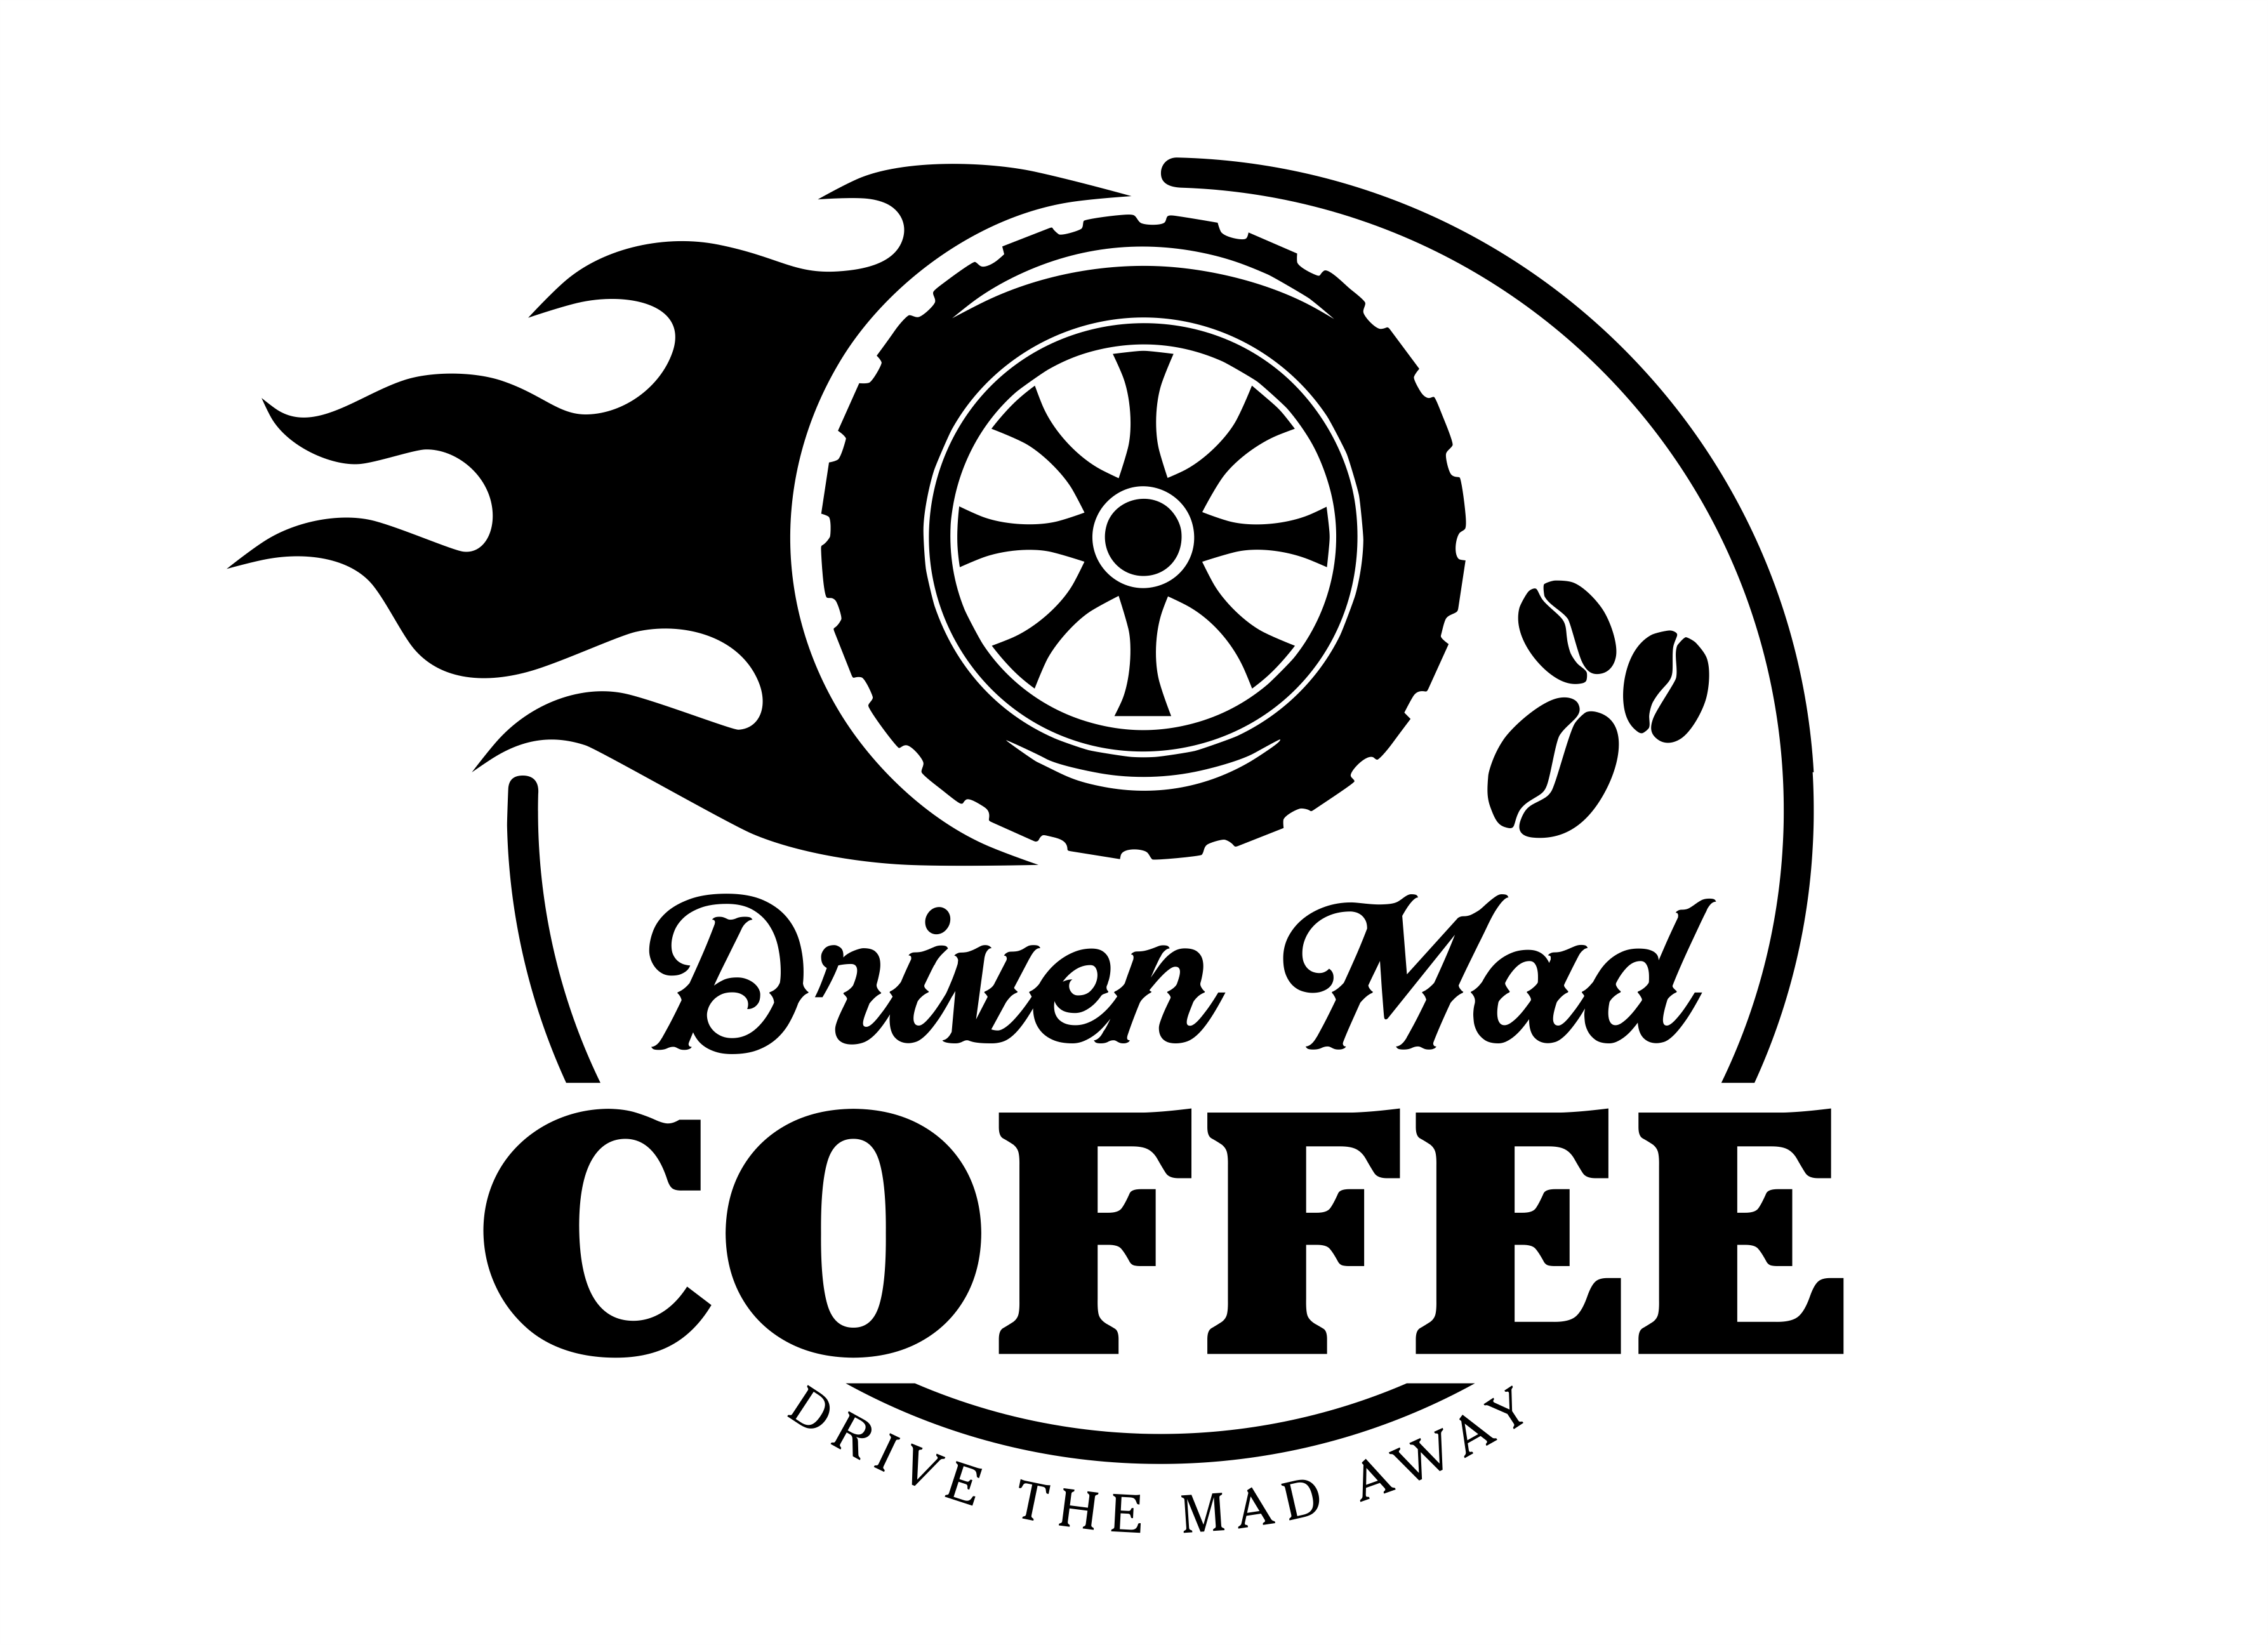 Driven Mad Coffee Logo Design by HIE Signs